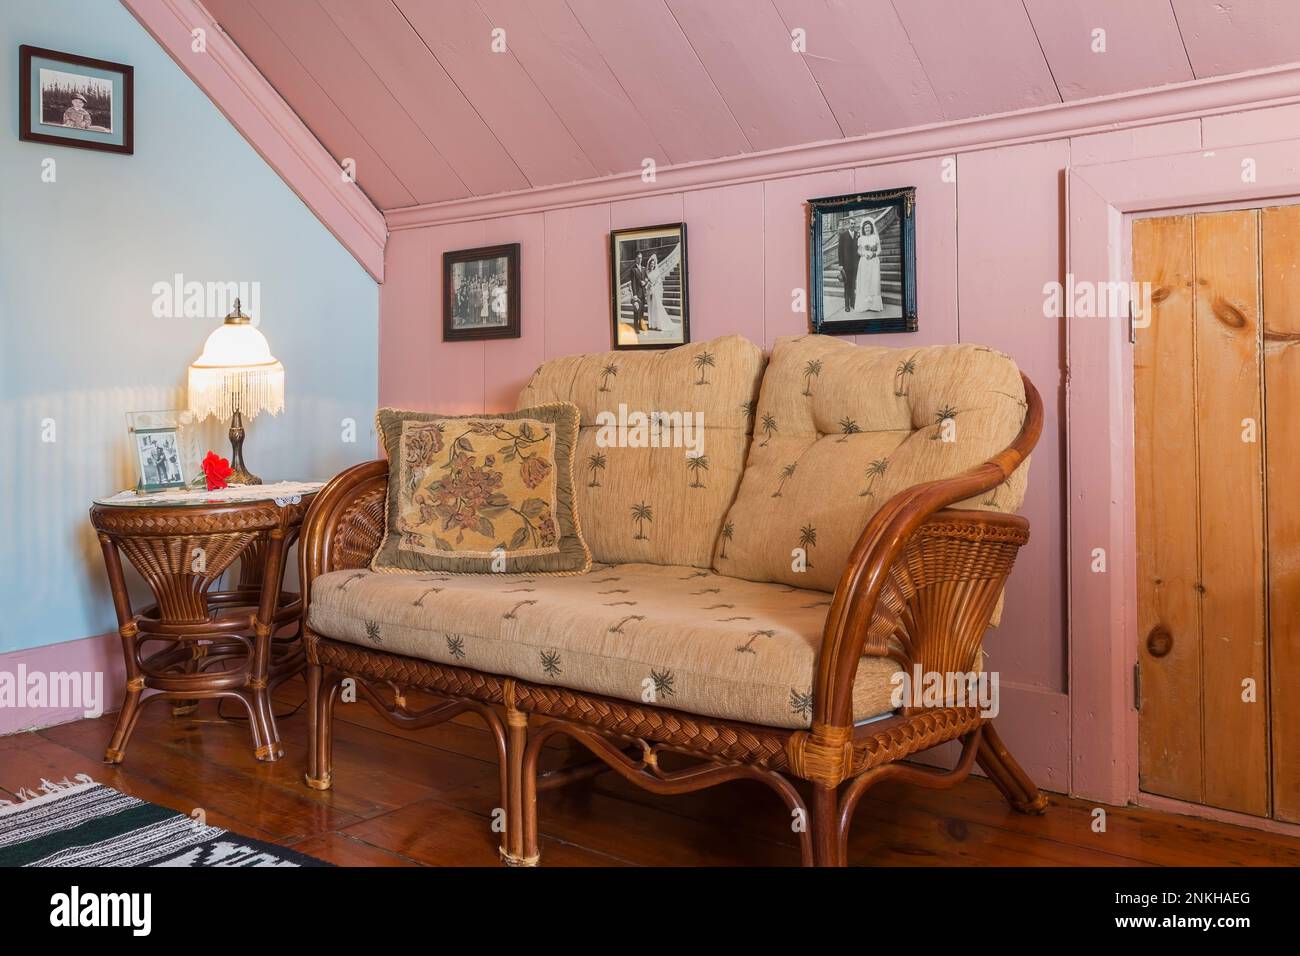 Rattan wicker sofa and end table in parlour room on upstairs floor inside old circa 1840 house. Stock Photo